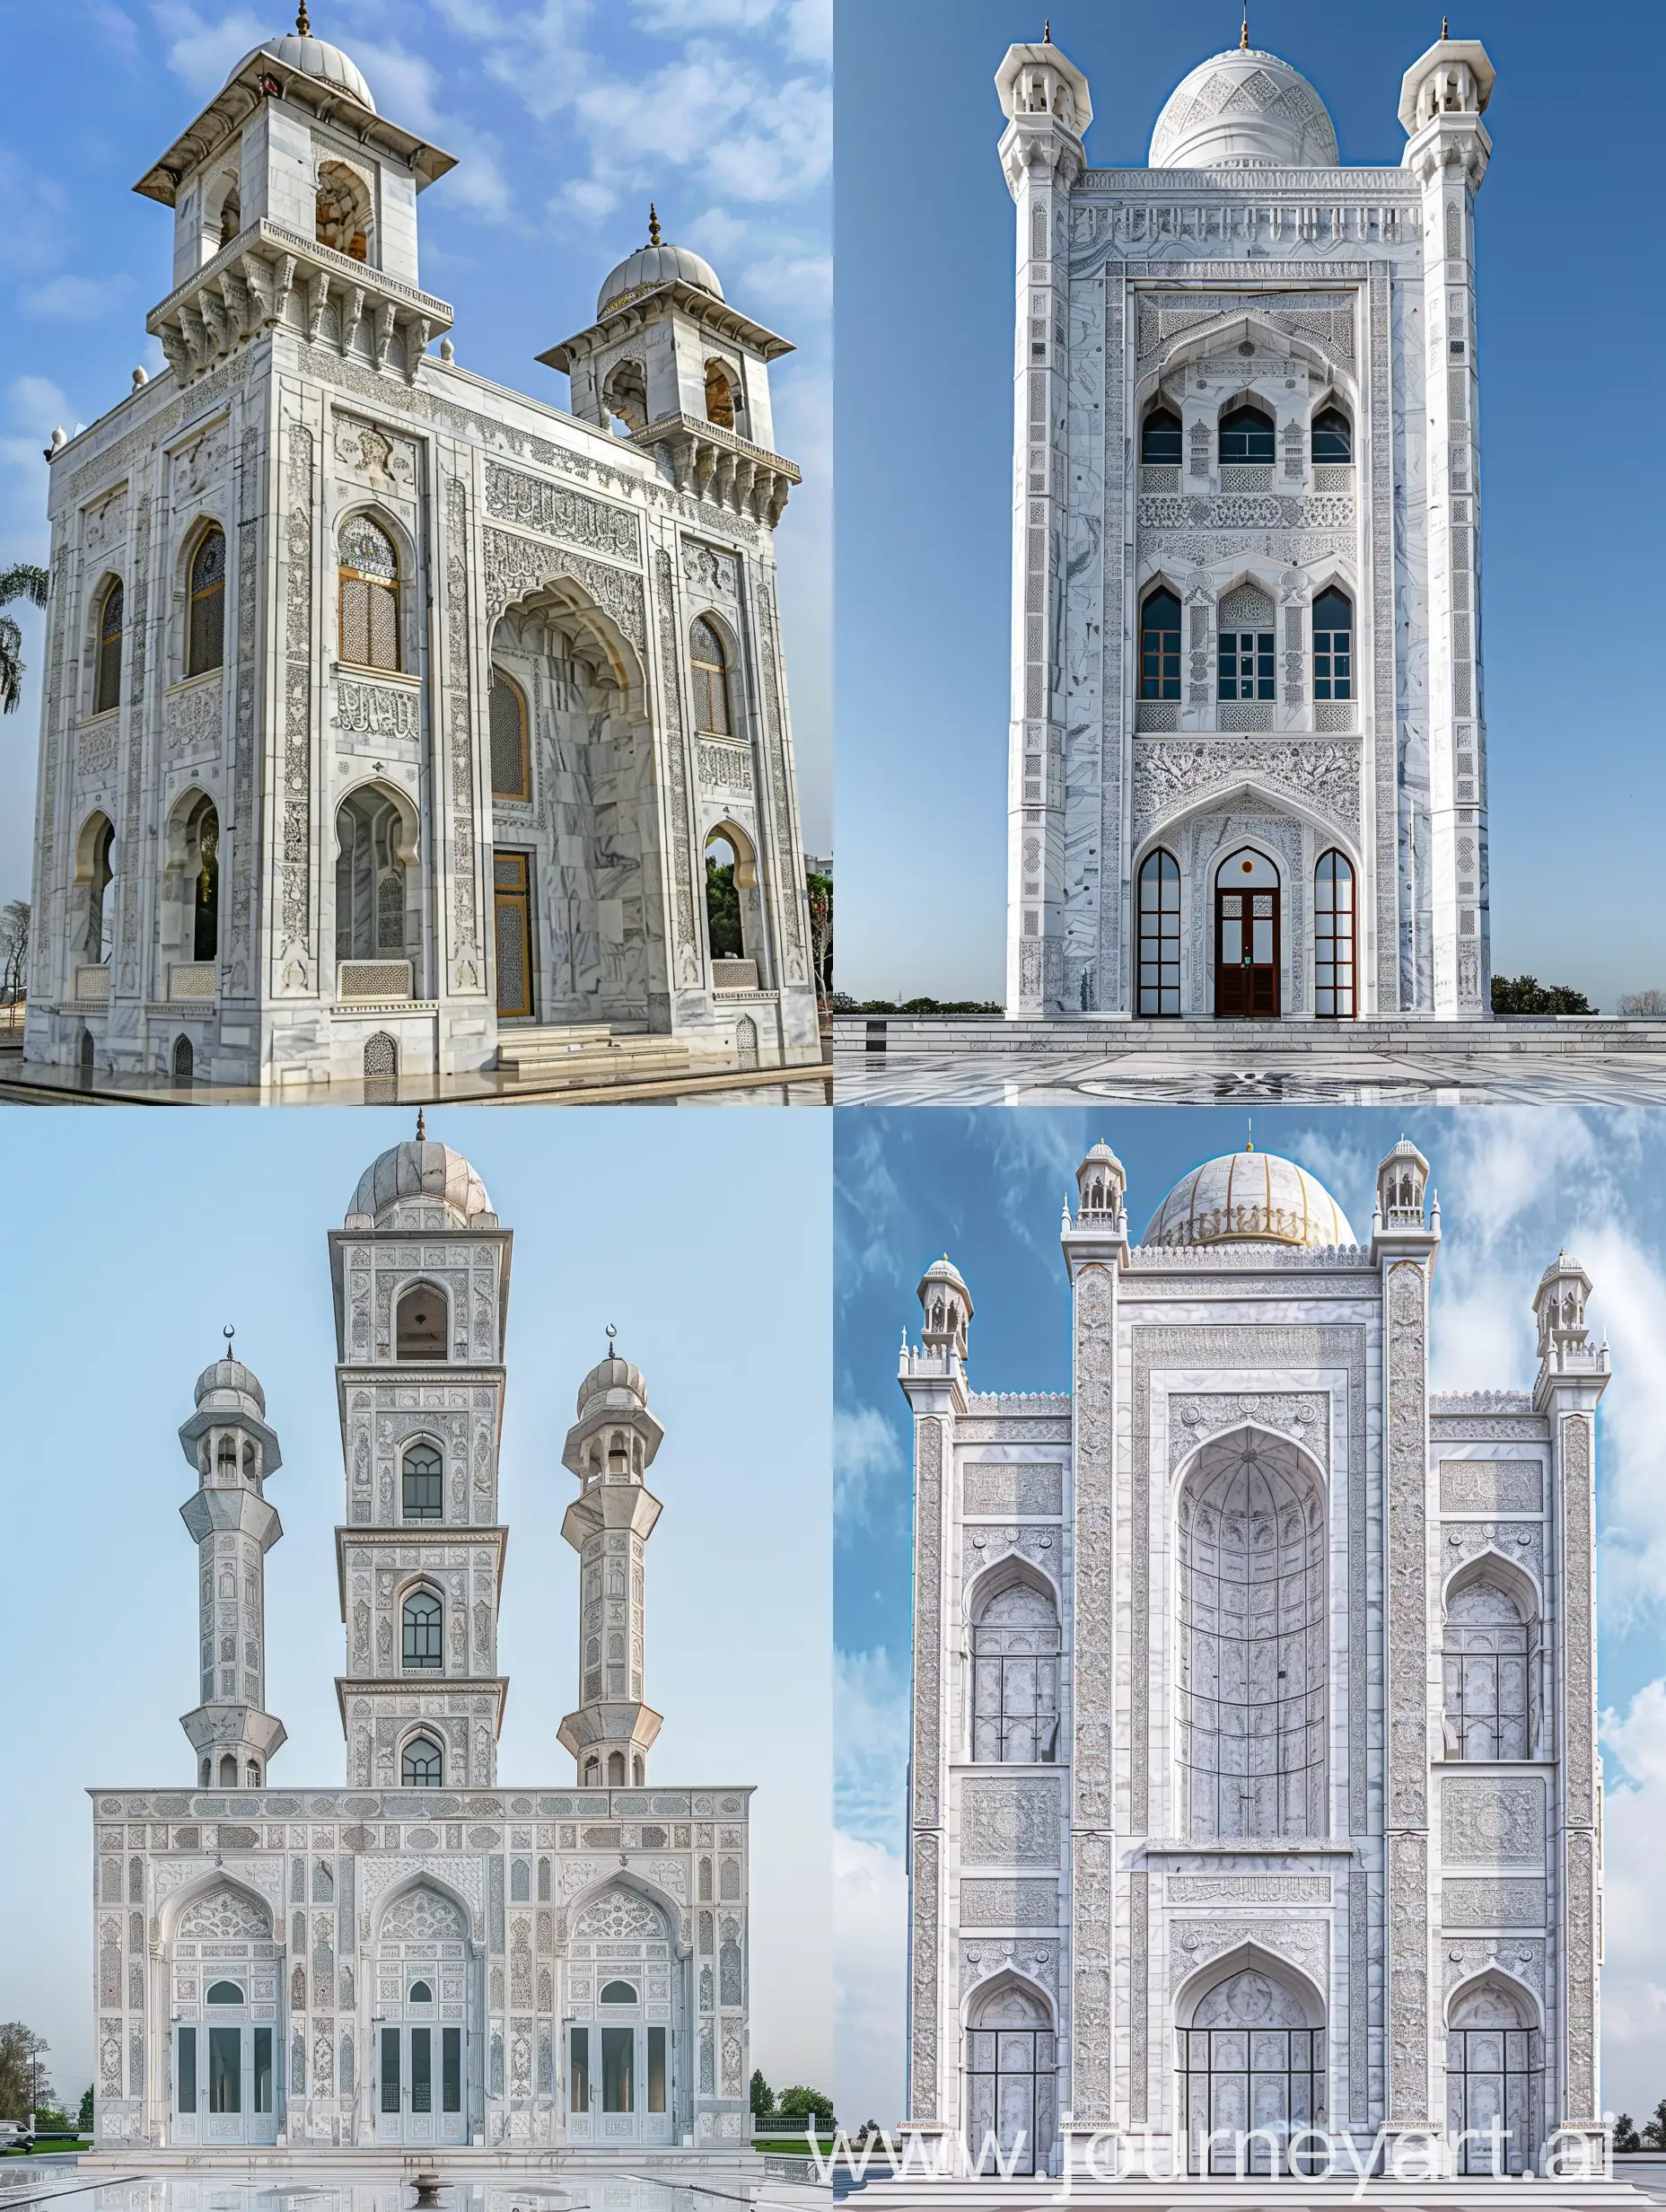 Grand-Mughal-Mosque-with-Elegant-Marble-Carvings-and-Gurudwara-Dome